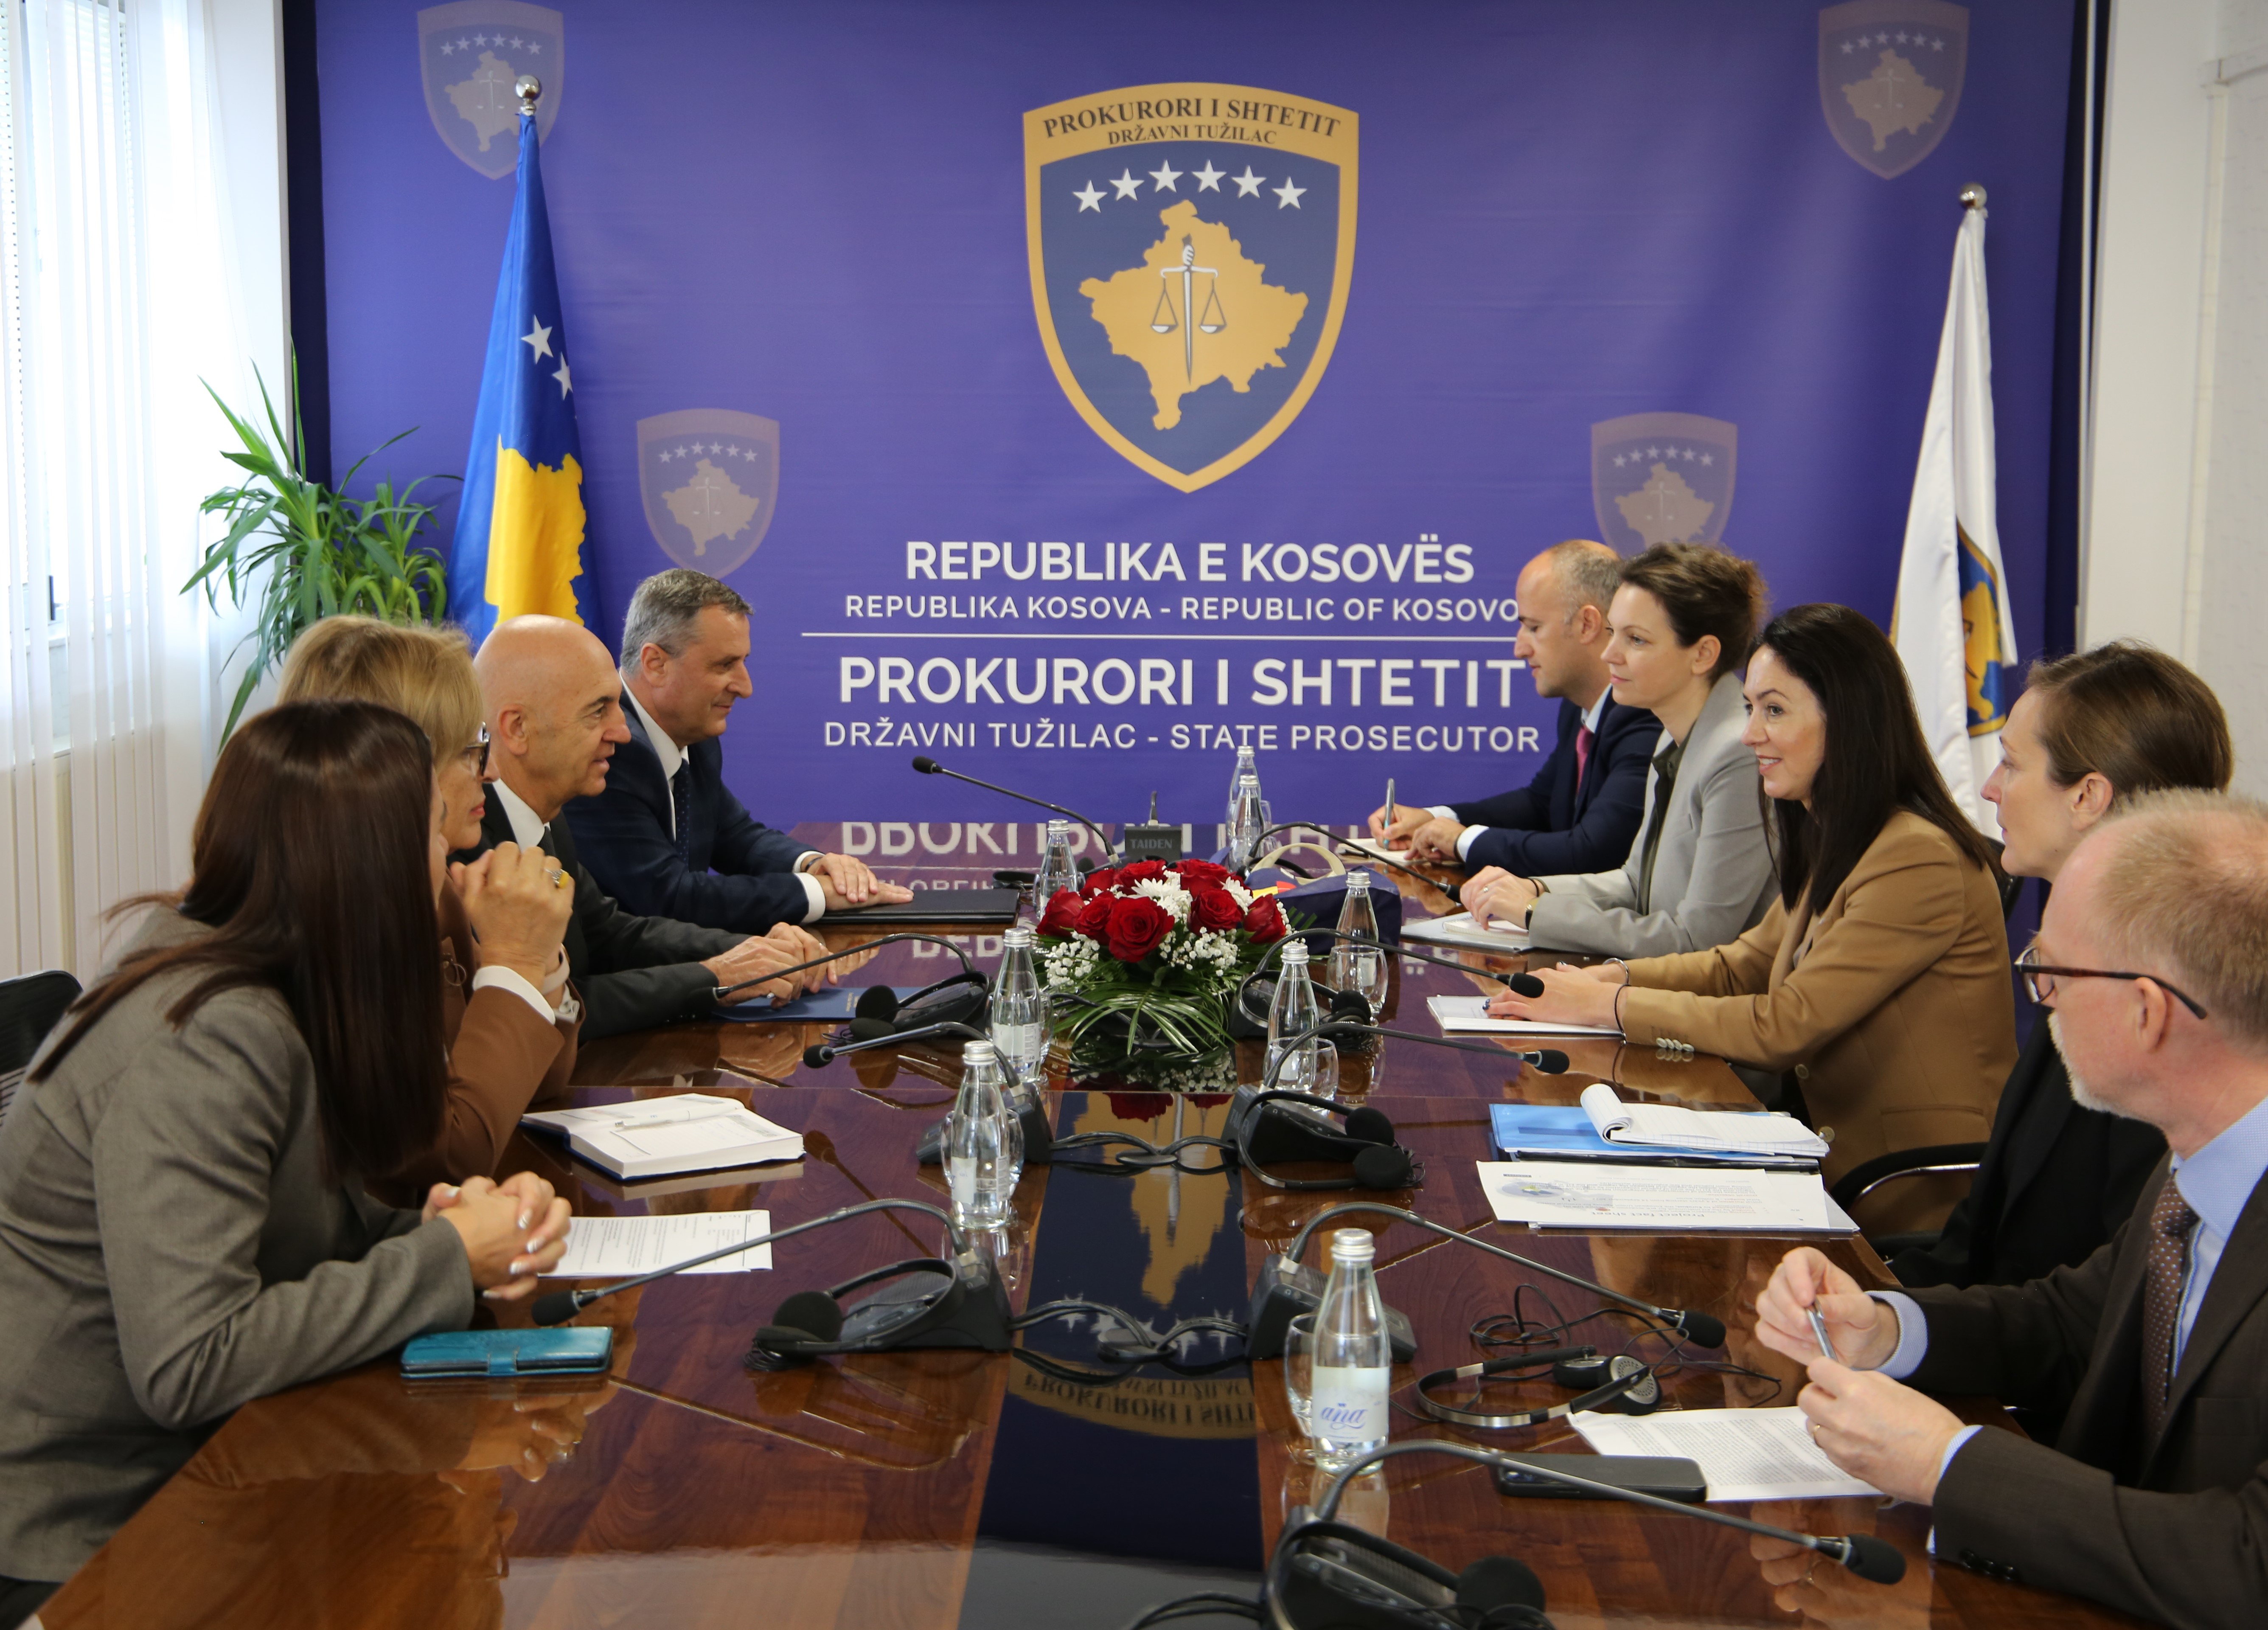 The advancement of cooperation between the State Prosecutor and EUROJUST in the field of criminal justice is discussed